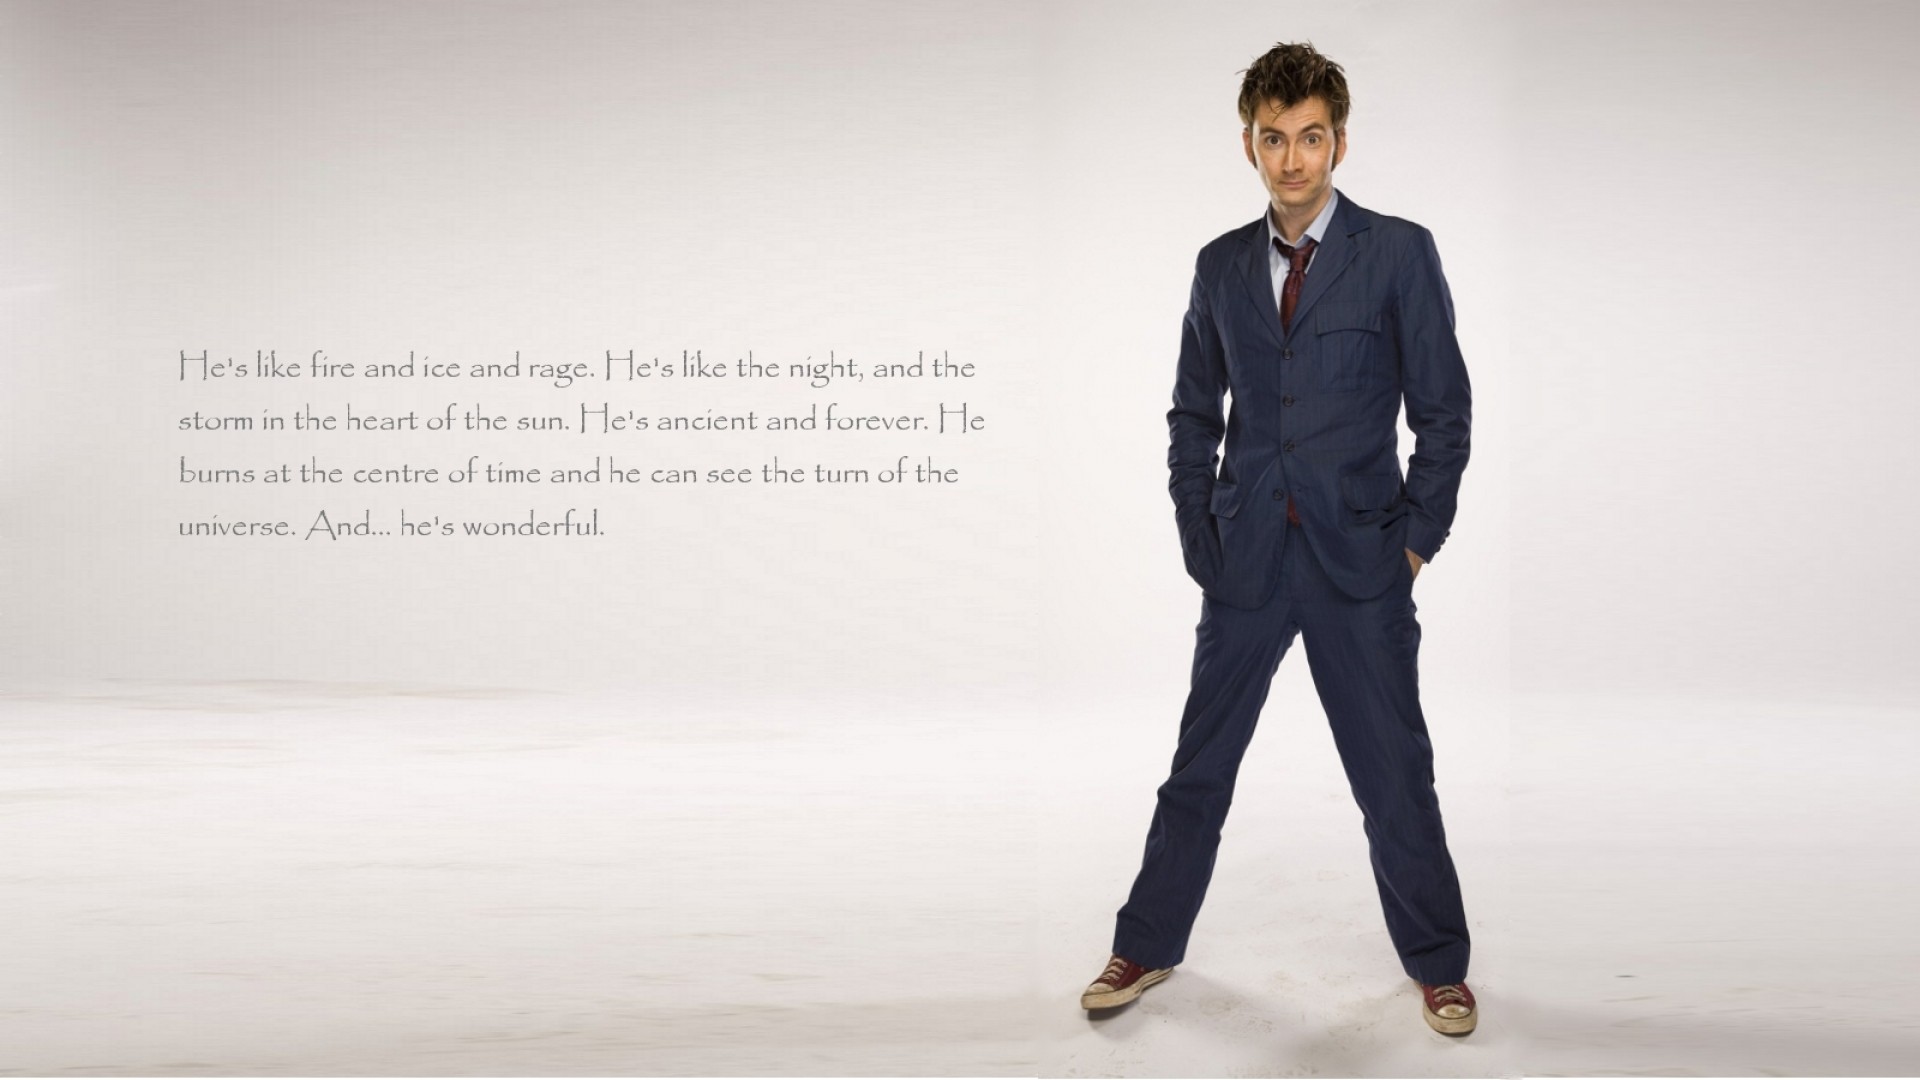 Doctor Who, The Doctor, David Tennant, Tenth Doctor Wallpaper